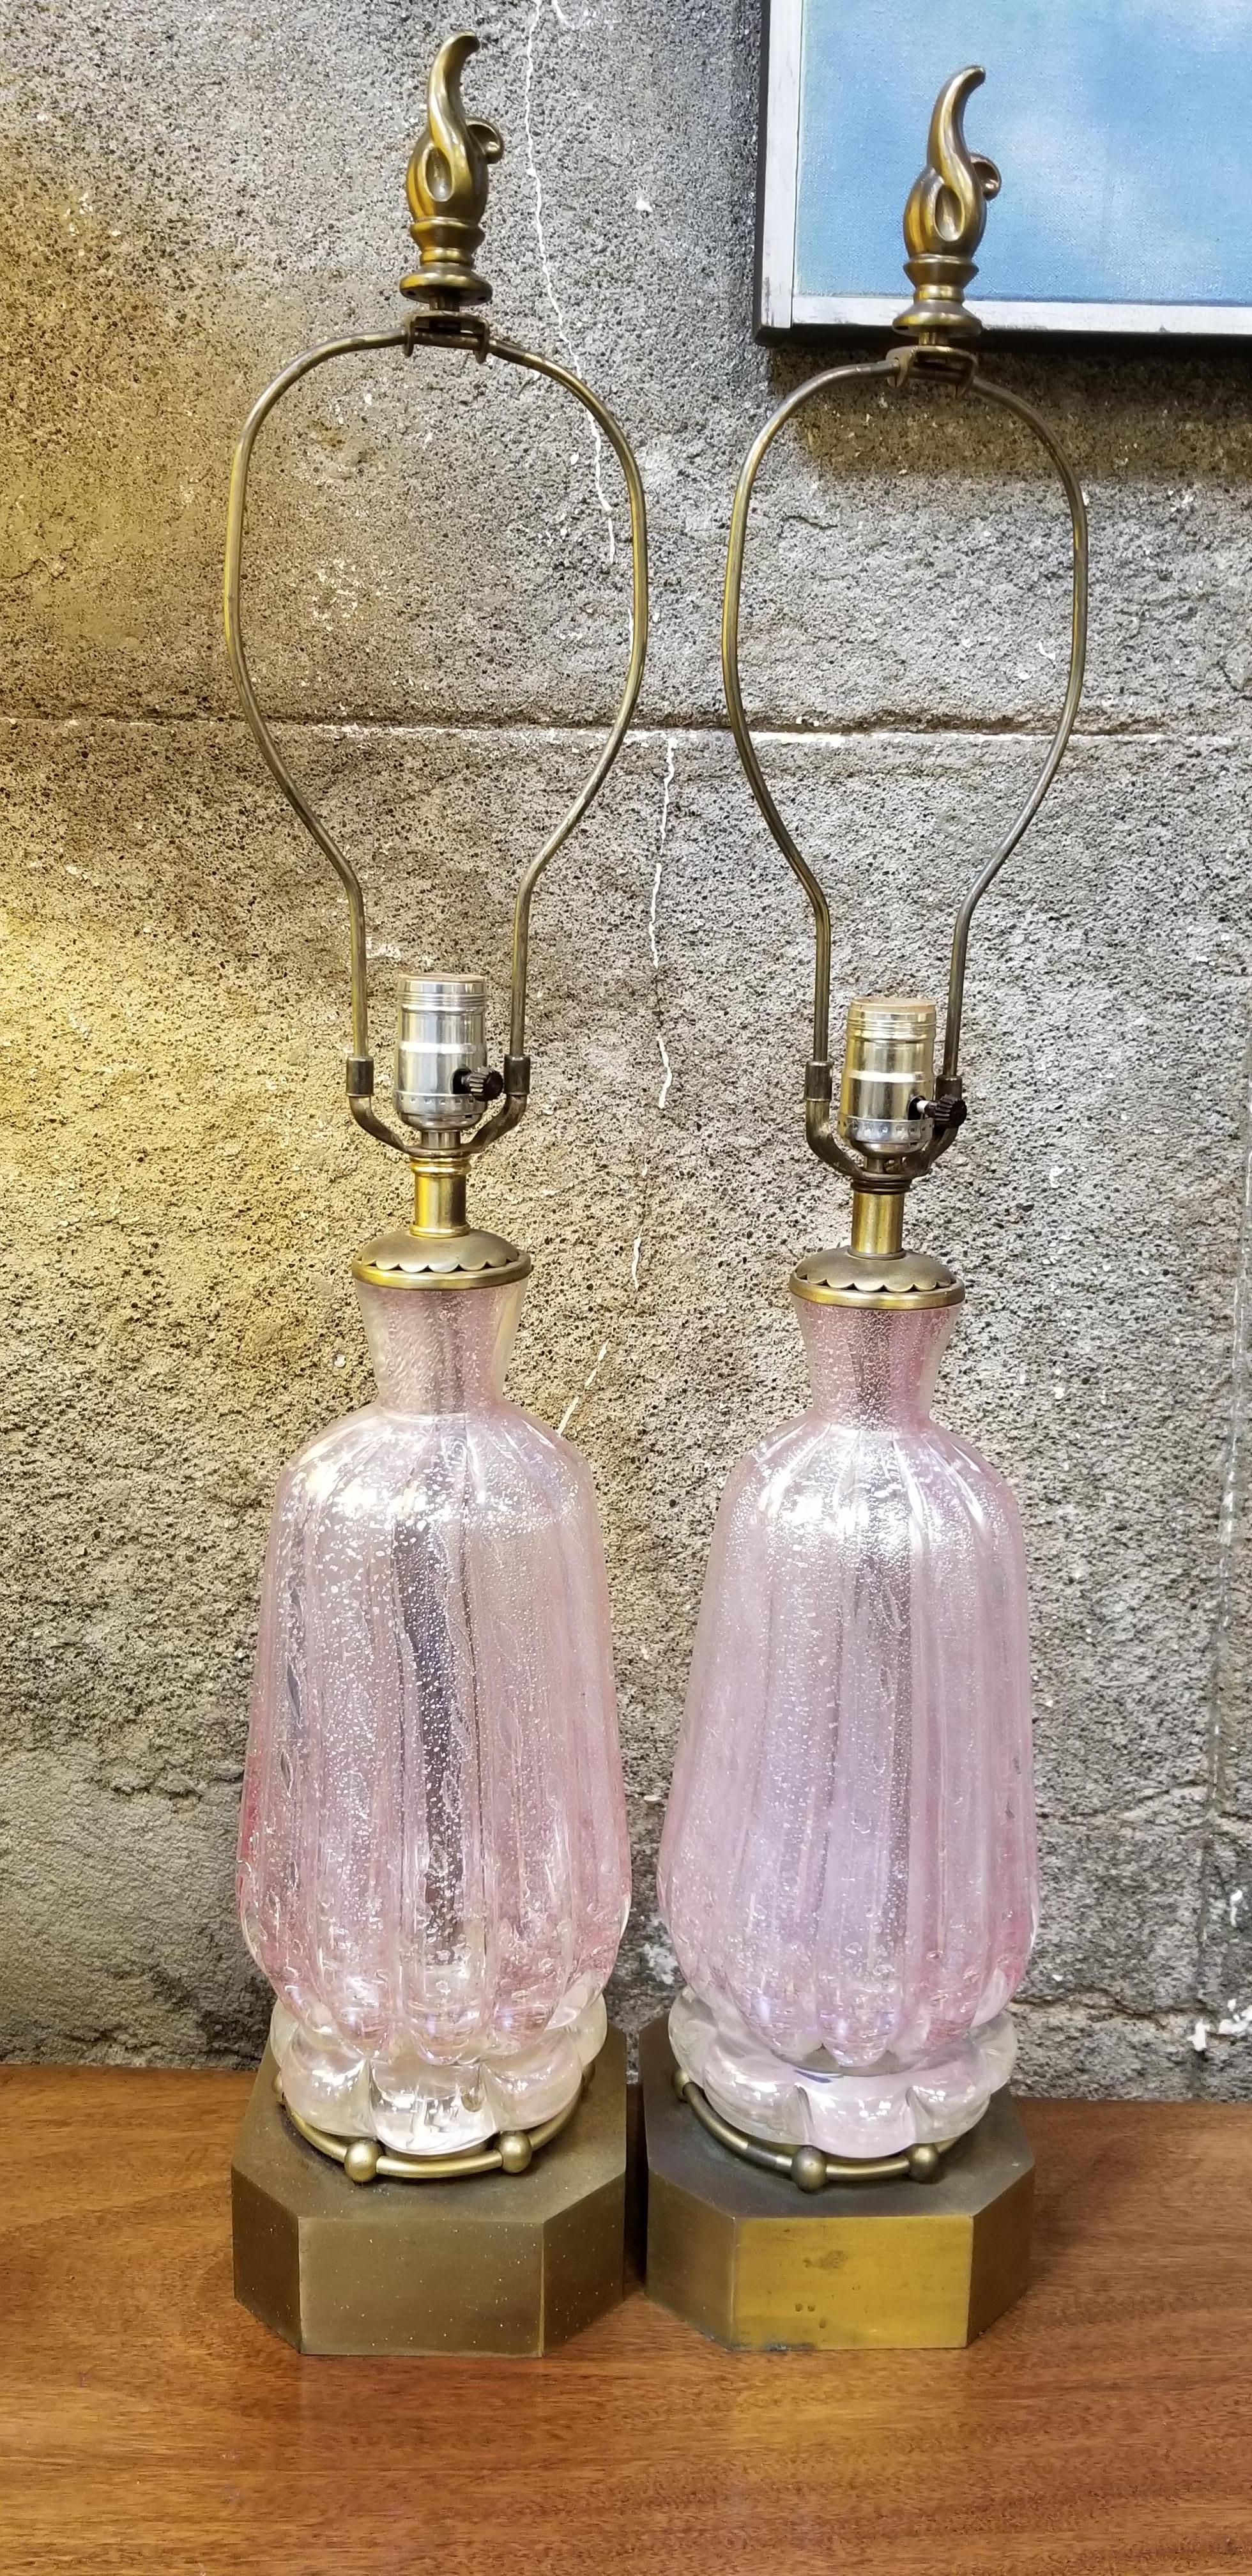 A pair of hand blown Murano glass table lamps, pink bubble glass with floating silver leaf detail. Original, vintage condition. Original brass bases. Original harps and flame brass finials, circa 1960s. No shades. Glass only measures 13.25 inches in